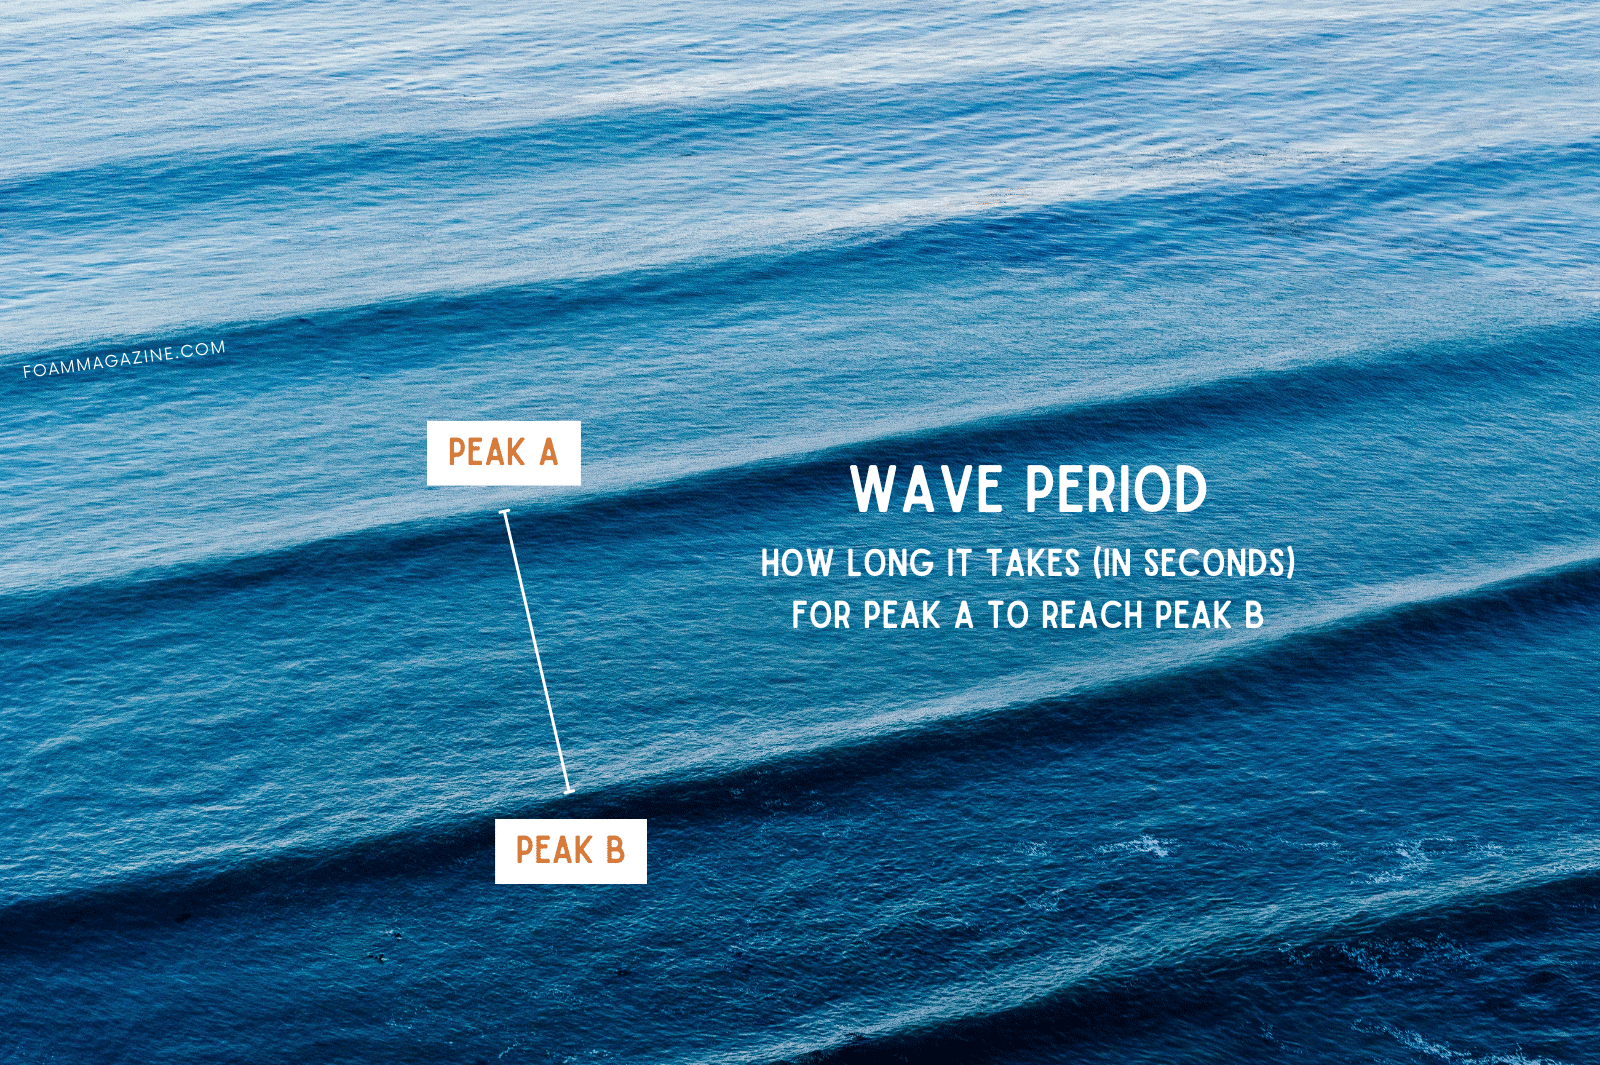 Image depicting a wave period between two peaks in a swell